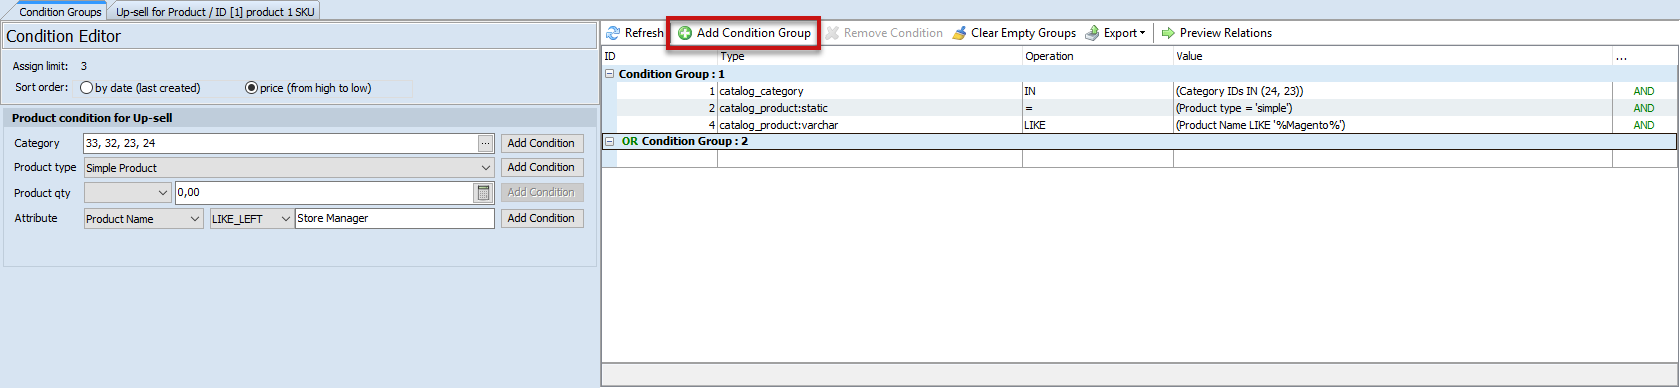 Related Product Generator for Up-sells Configuration Form